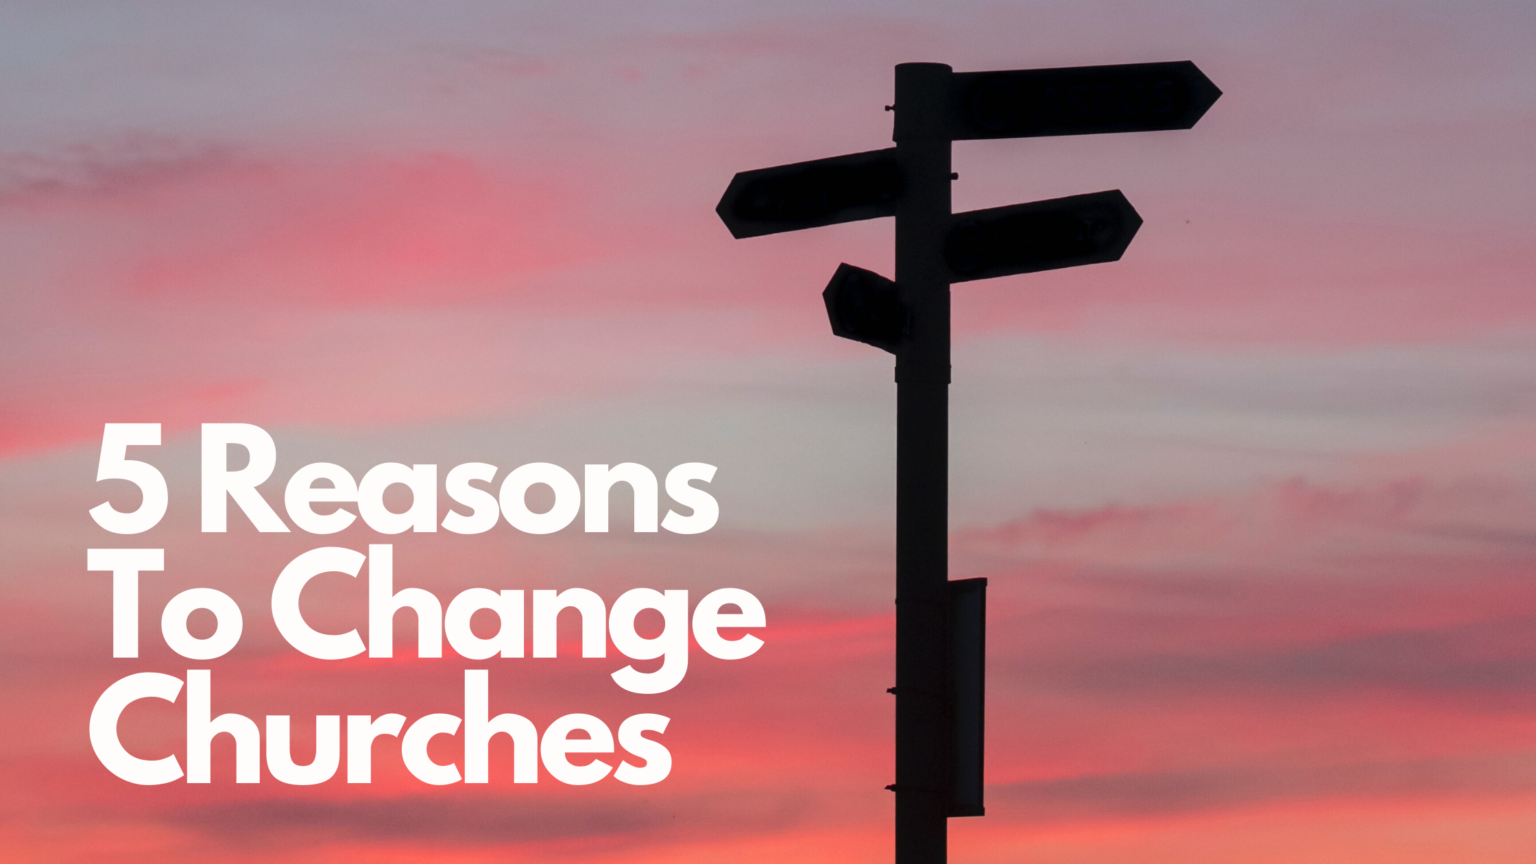 Thinking about changing churches? Here are 5 reasons you may want to change churches.